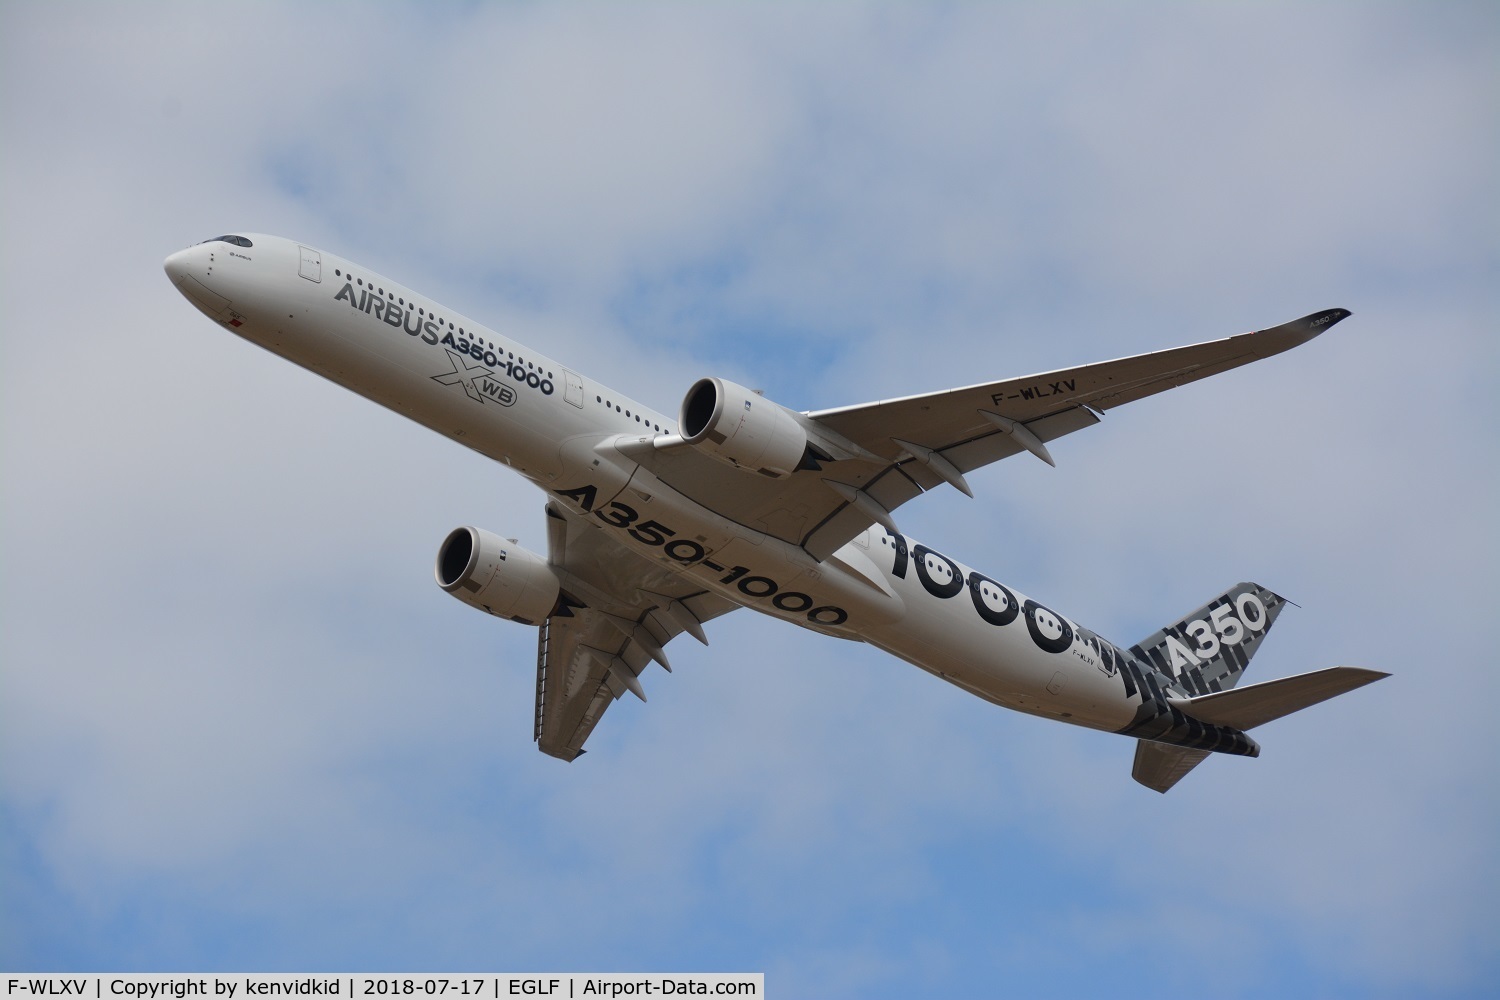 F-WLXV, 2016 Airbus A350-1041 C/N 0065, Displaying at FIA 2018.